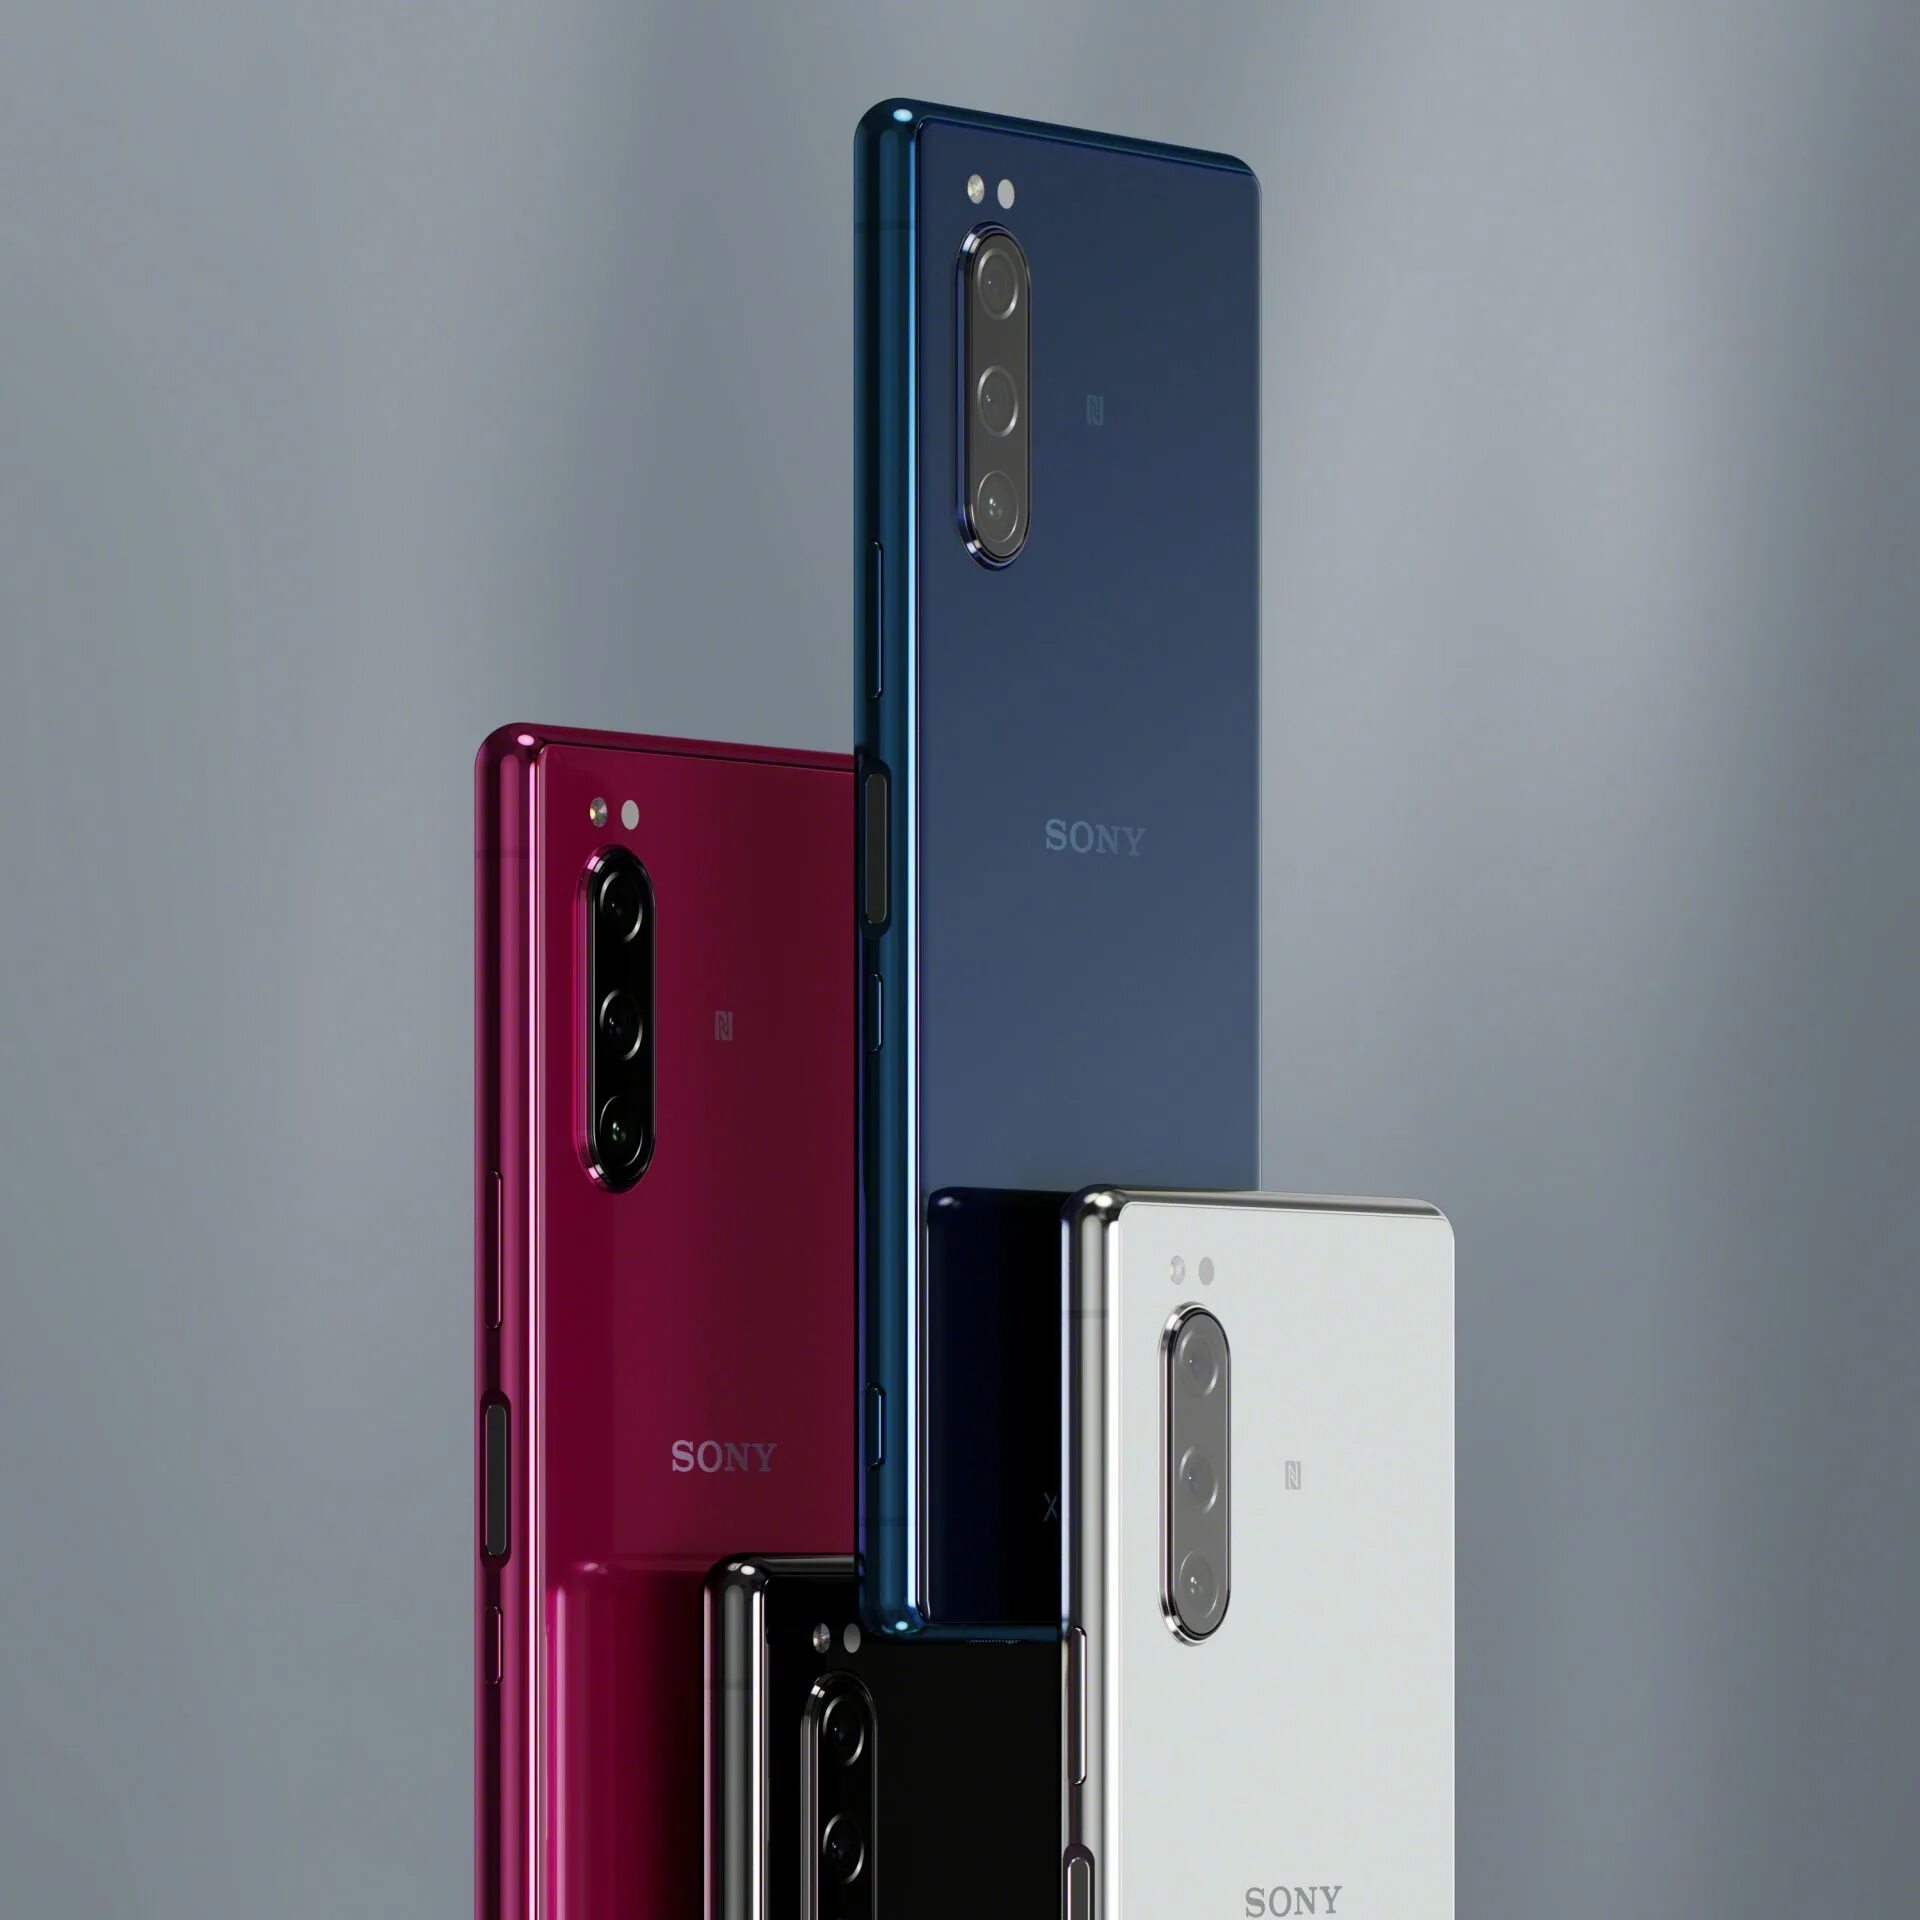 Sony Xperia 5 IV. Sony Xperia 5. Sony Xperia 5 II цвета. Sony Xperia 5 Red.